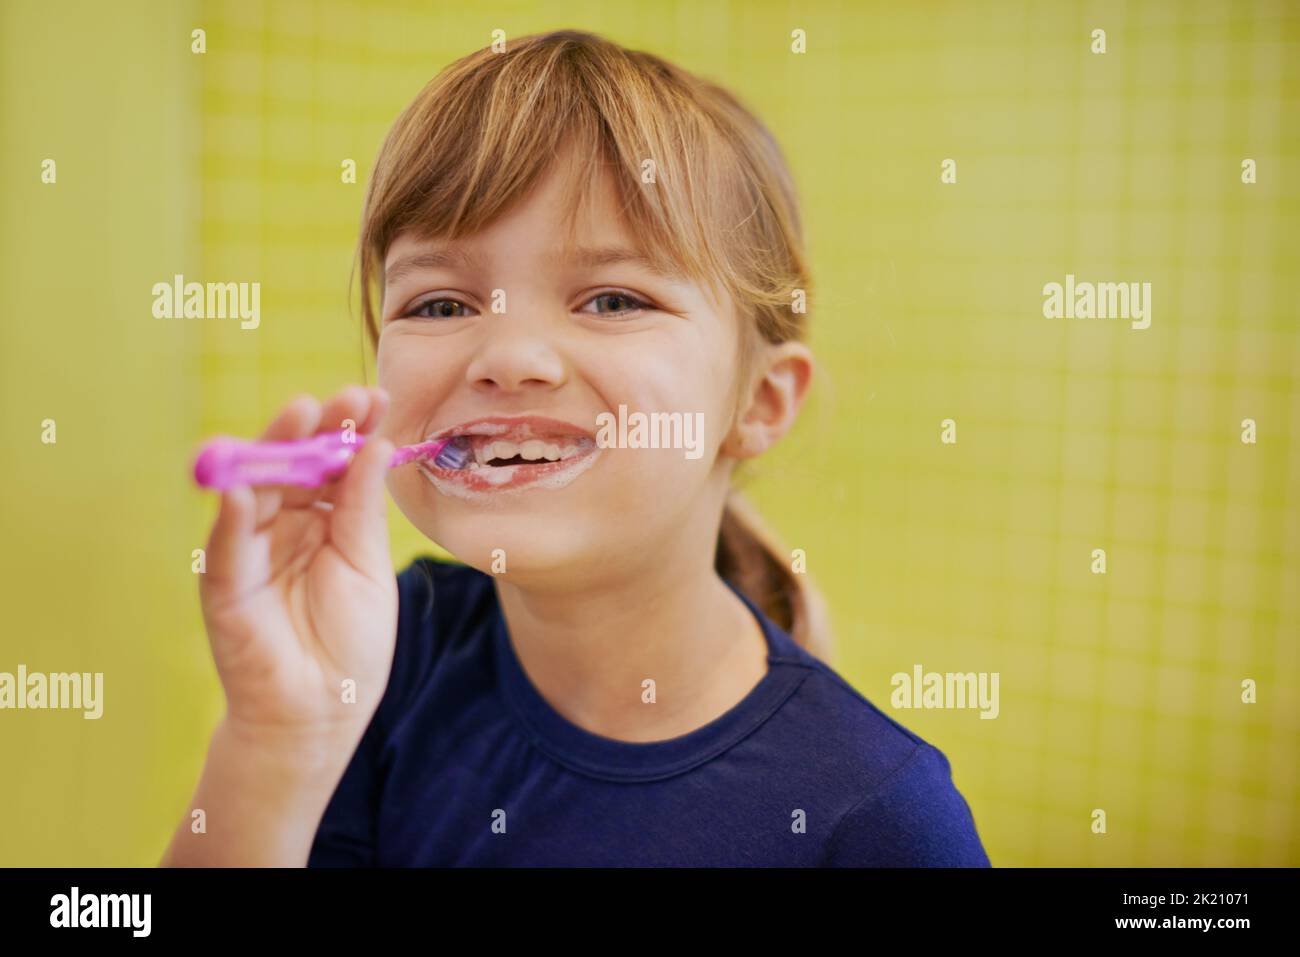 Keeping decay away. Portrait of a cute little girl brushing her teeth. Stock Photo